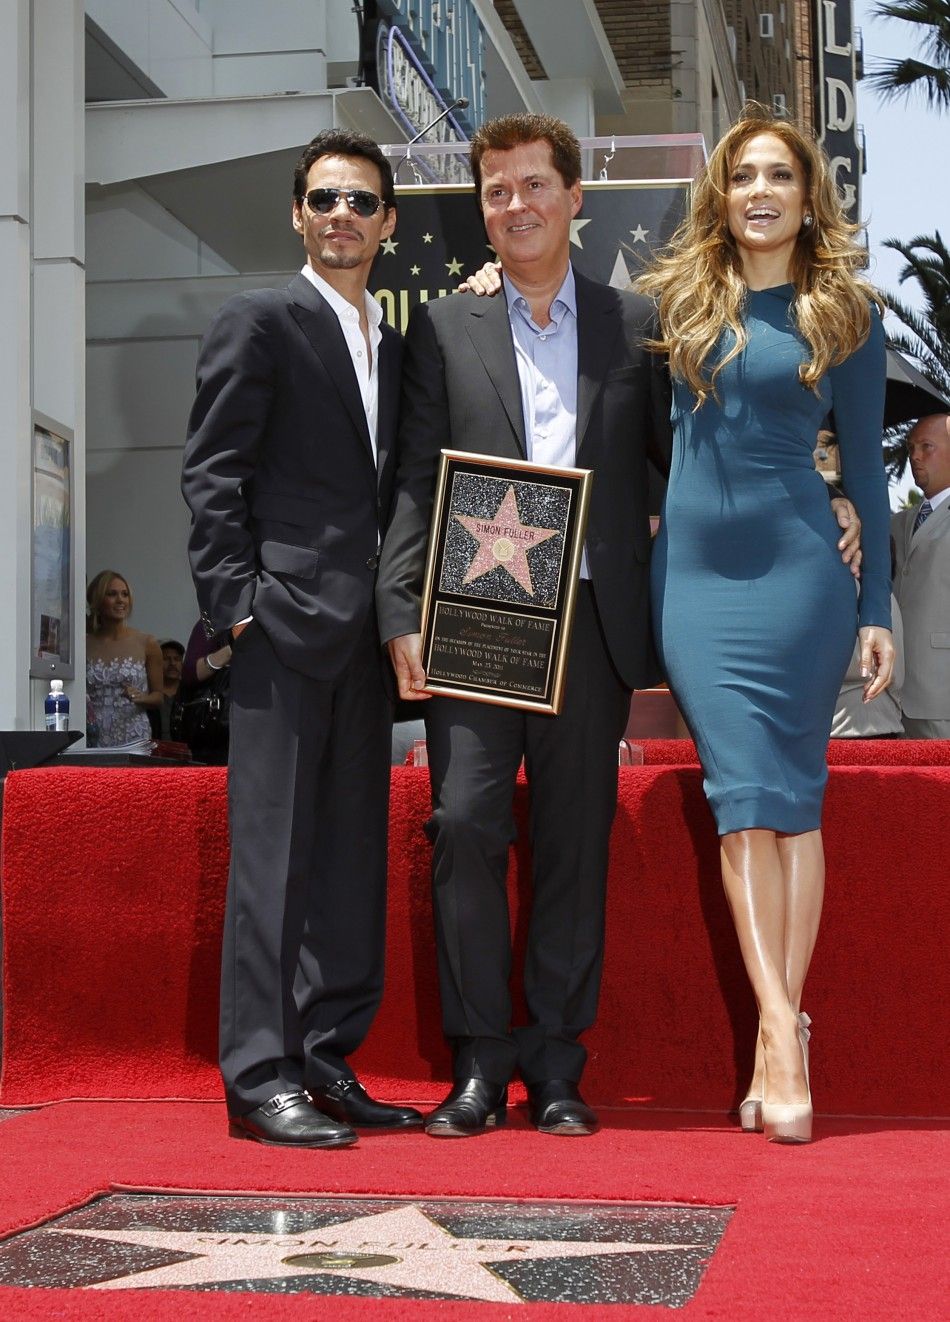 Fuller poses with Lopez and her husband Anthony after he was honored with a star on the Walk of Fame in Hollywood 23052011